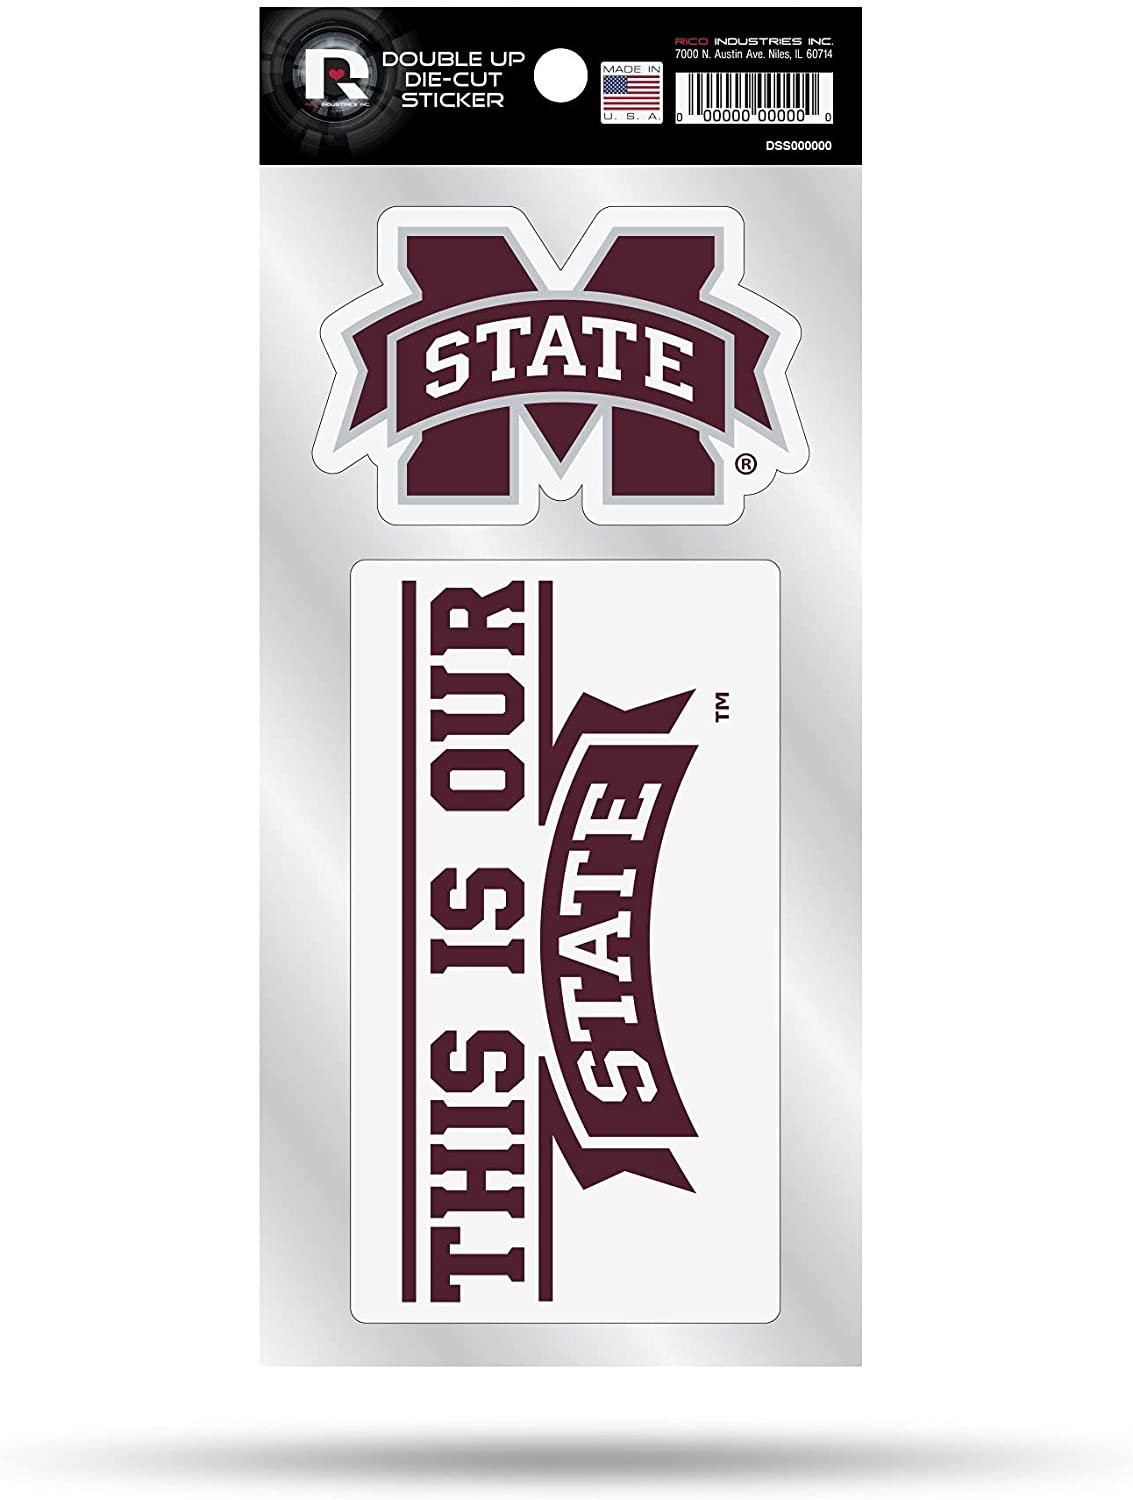 Mississippi State University Bulldogs 2-Piece Double Up Die Cut Sticker Decal Sheet, 4x8 Inch